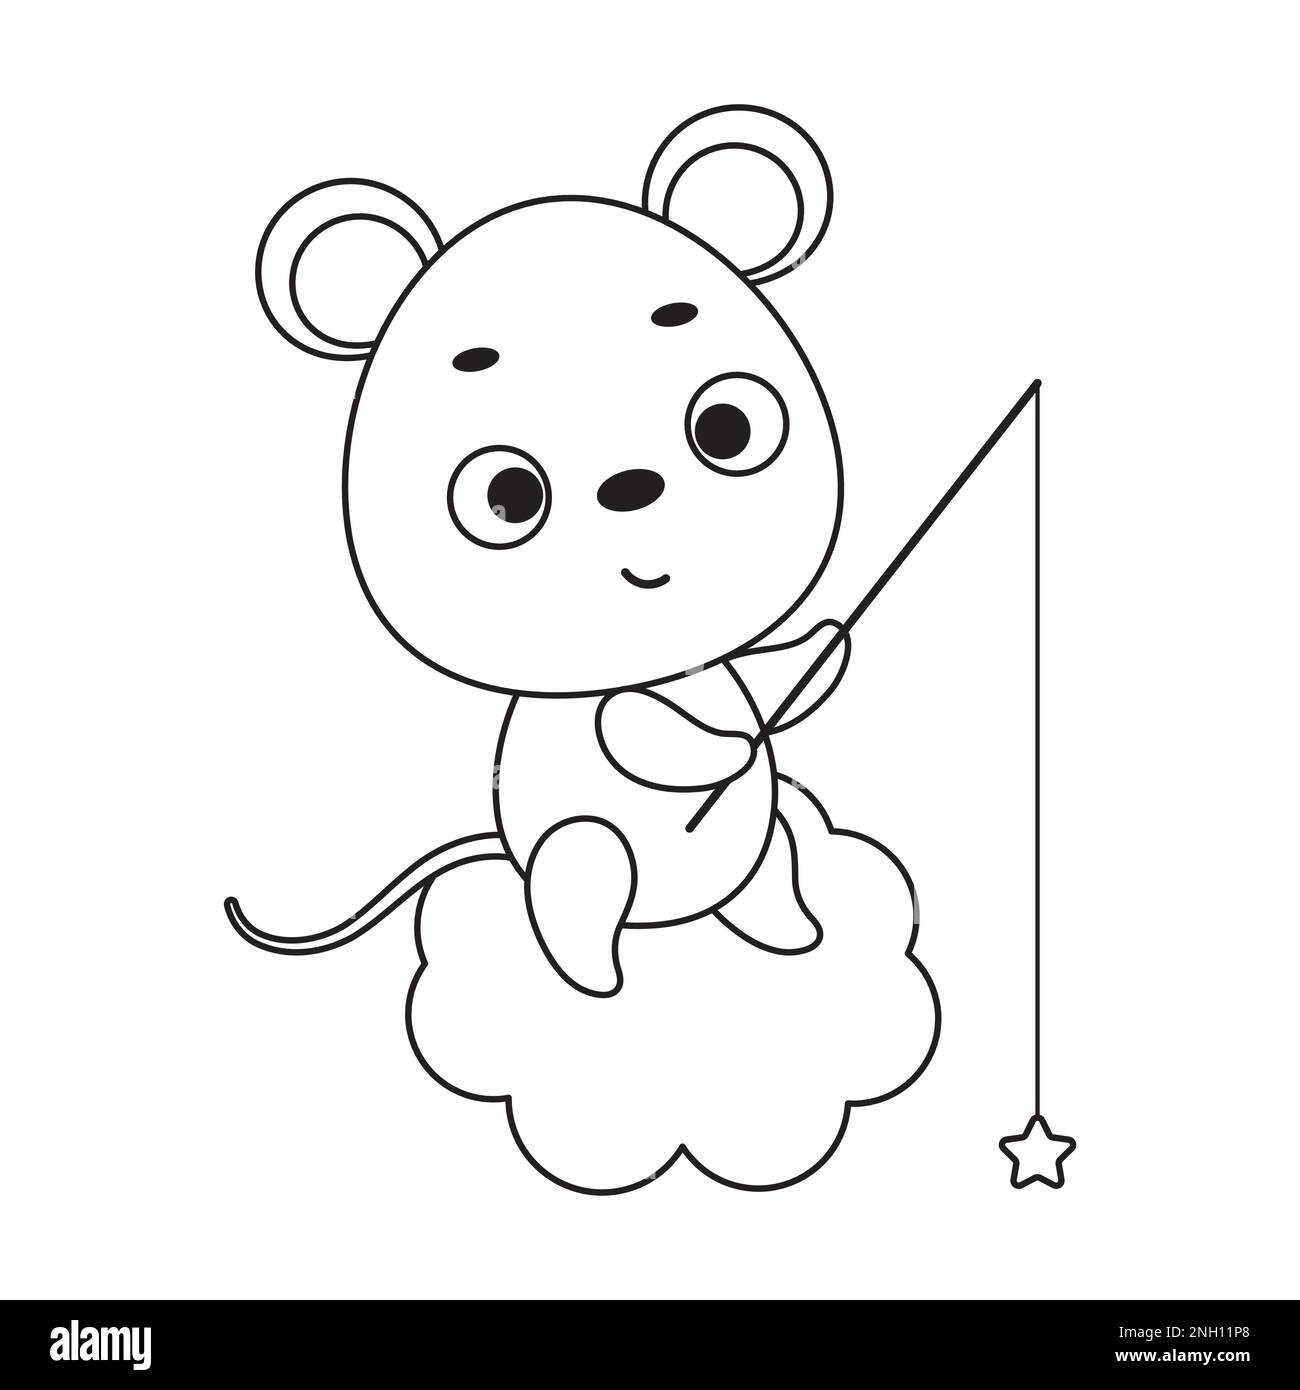 Coloring page cute little mouse fishing star on cloud. Coloring